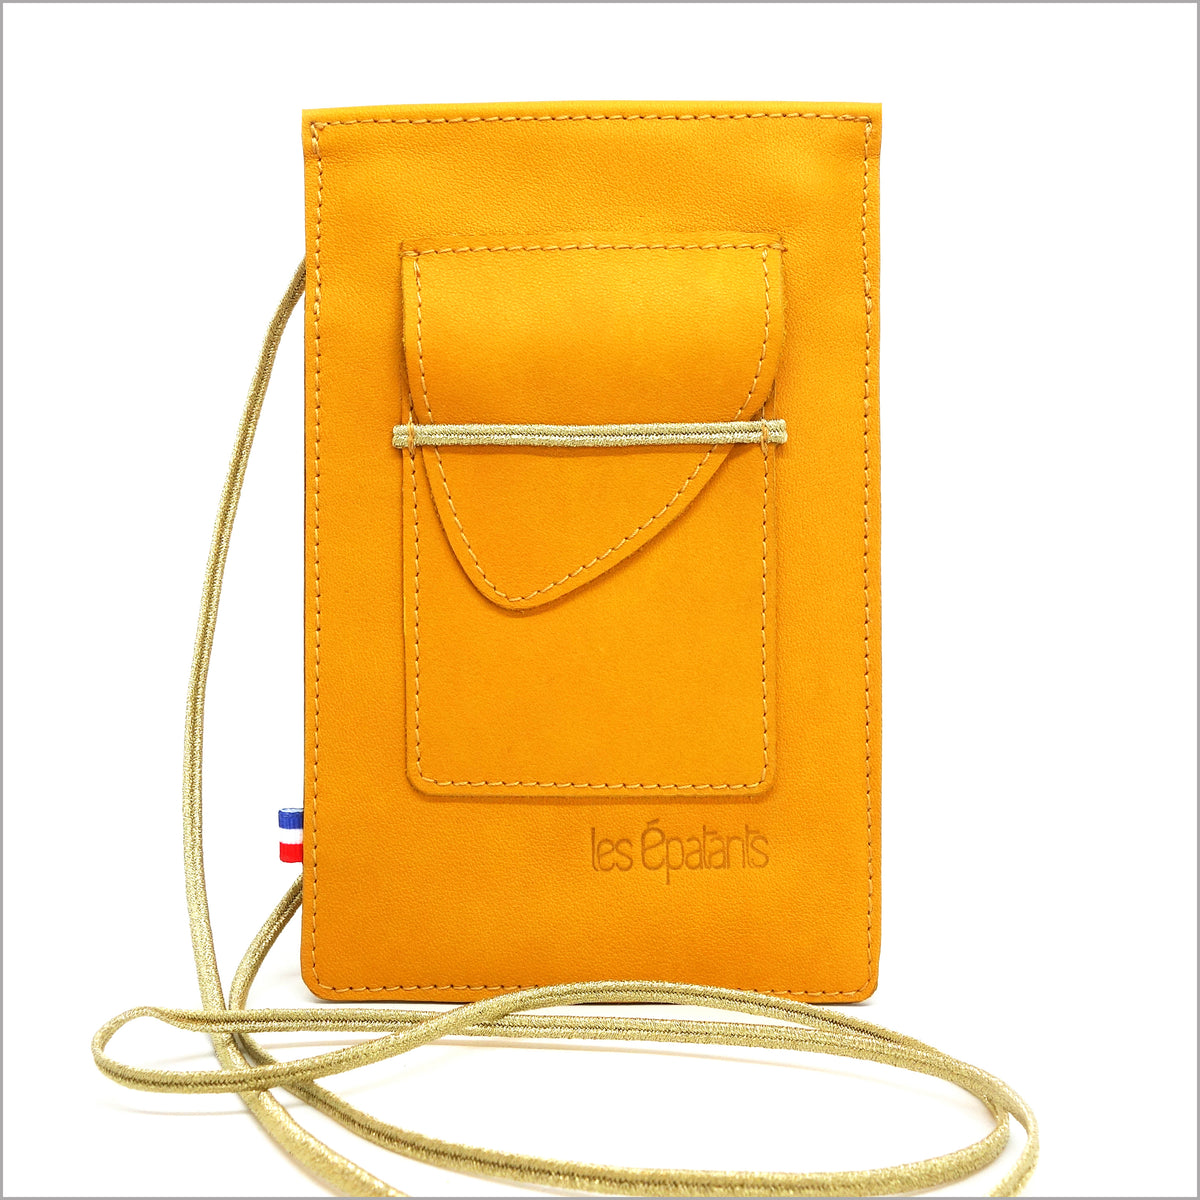 Telephone pouch in golden yellow leather with adjustable shoulder strap